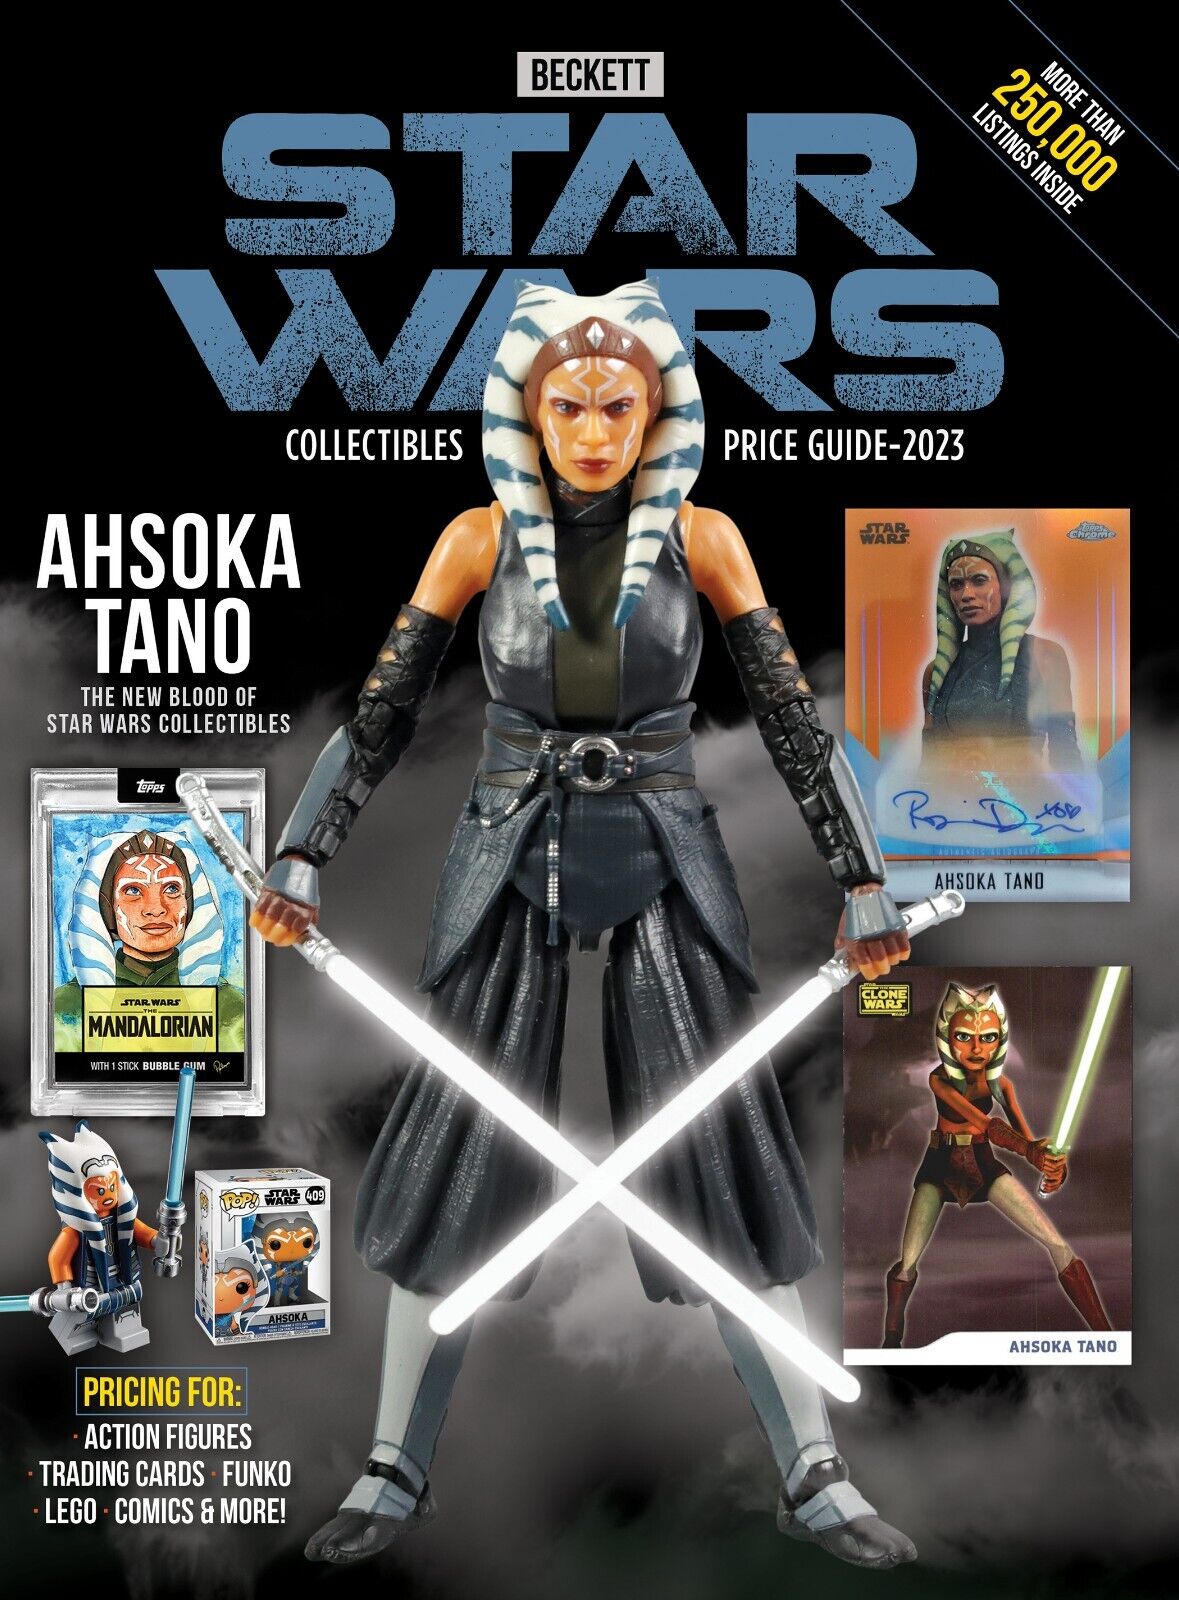 New 2023 Beckett Star Wars Collectibles #7 Price Guide Book With AHSOKA TANO